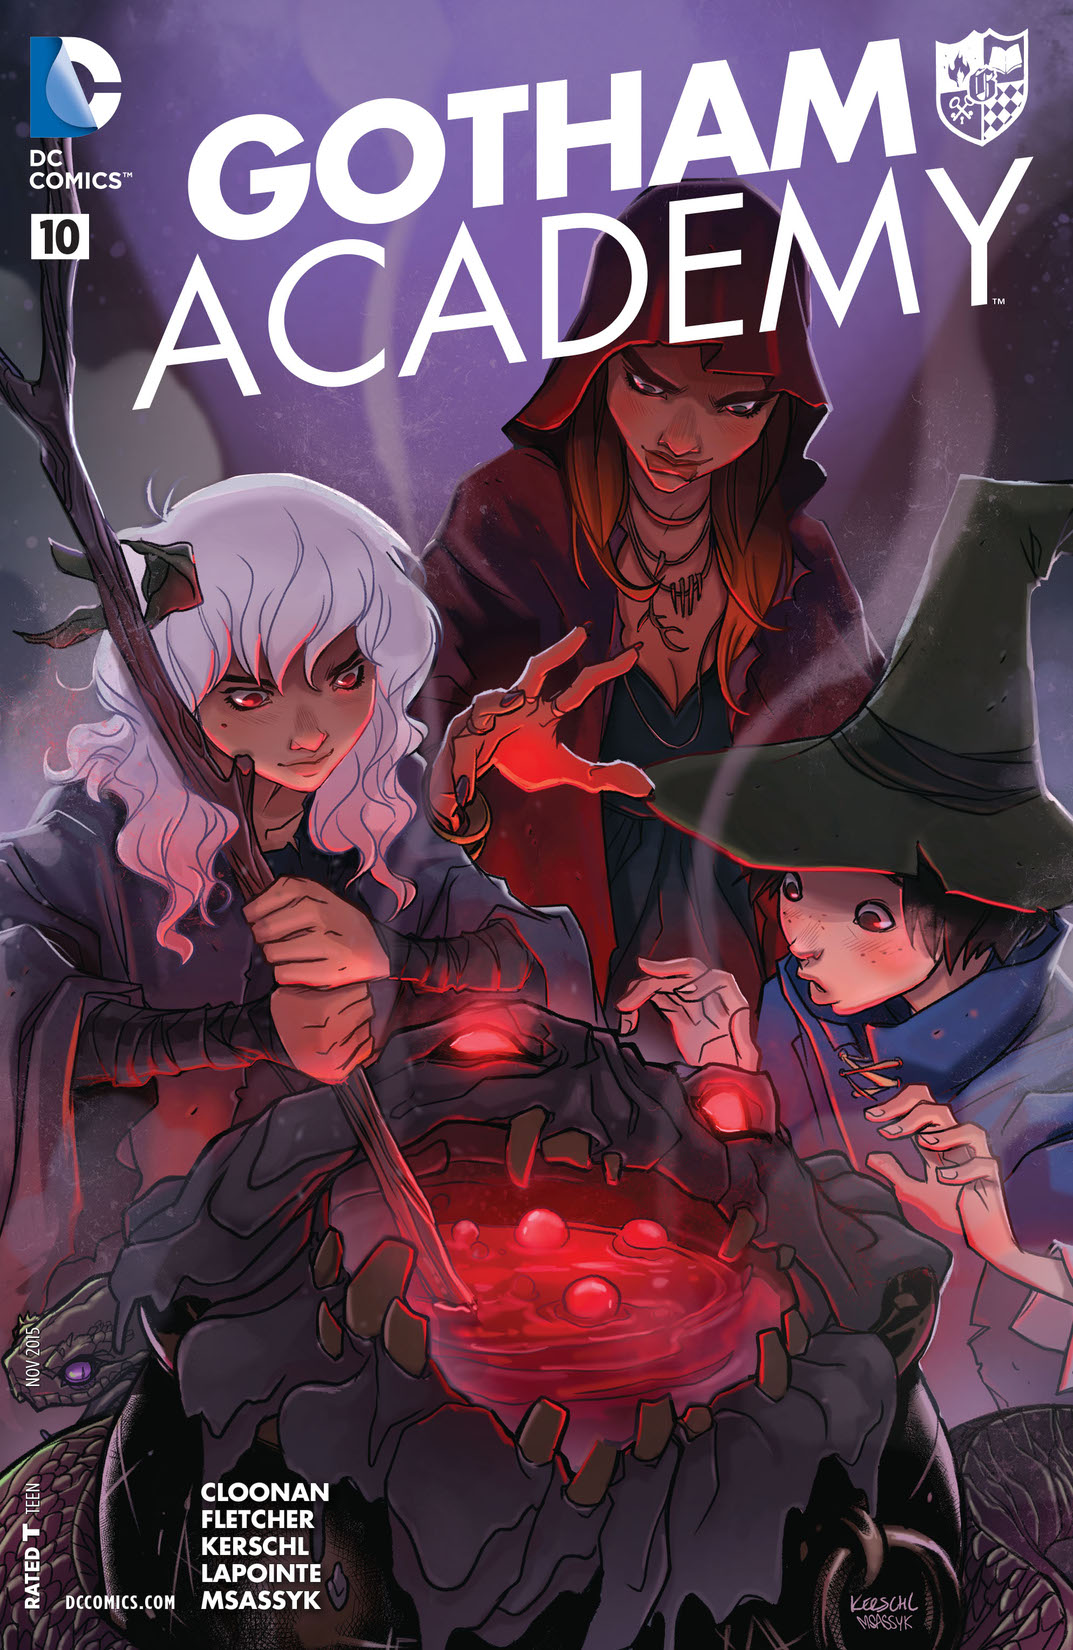 Gotham Academy #10 preview images